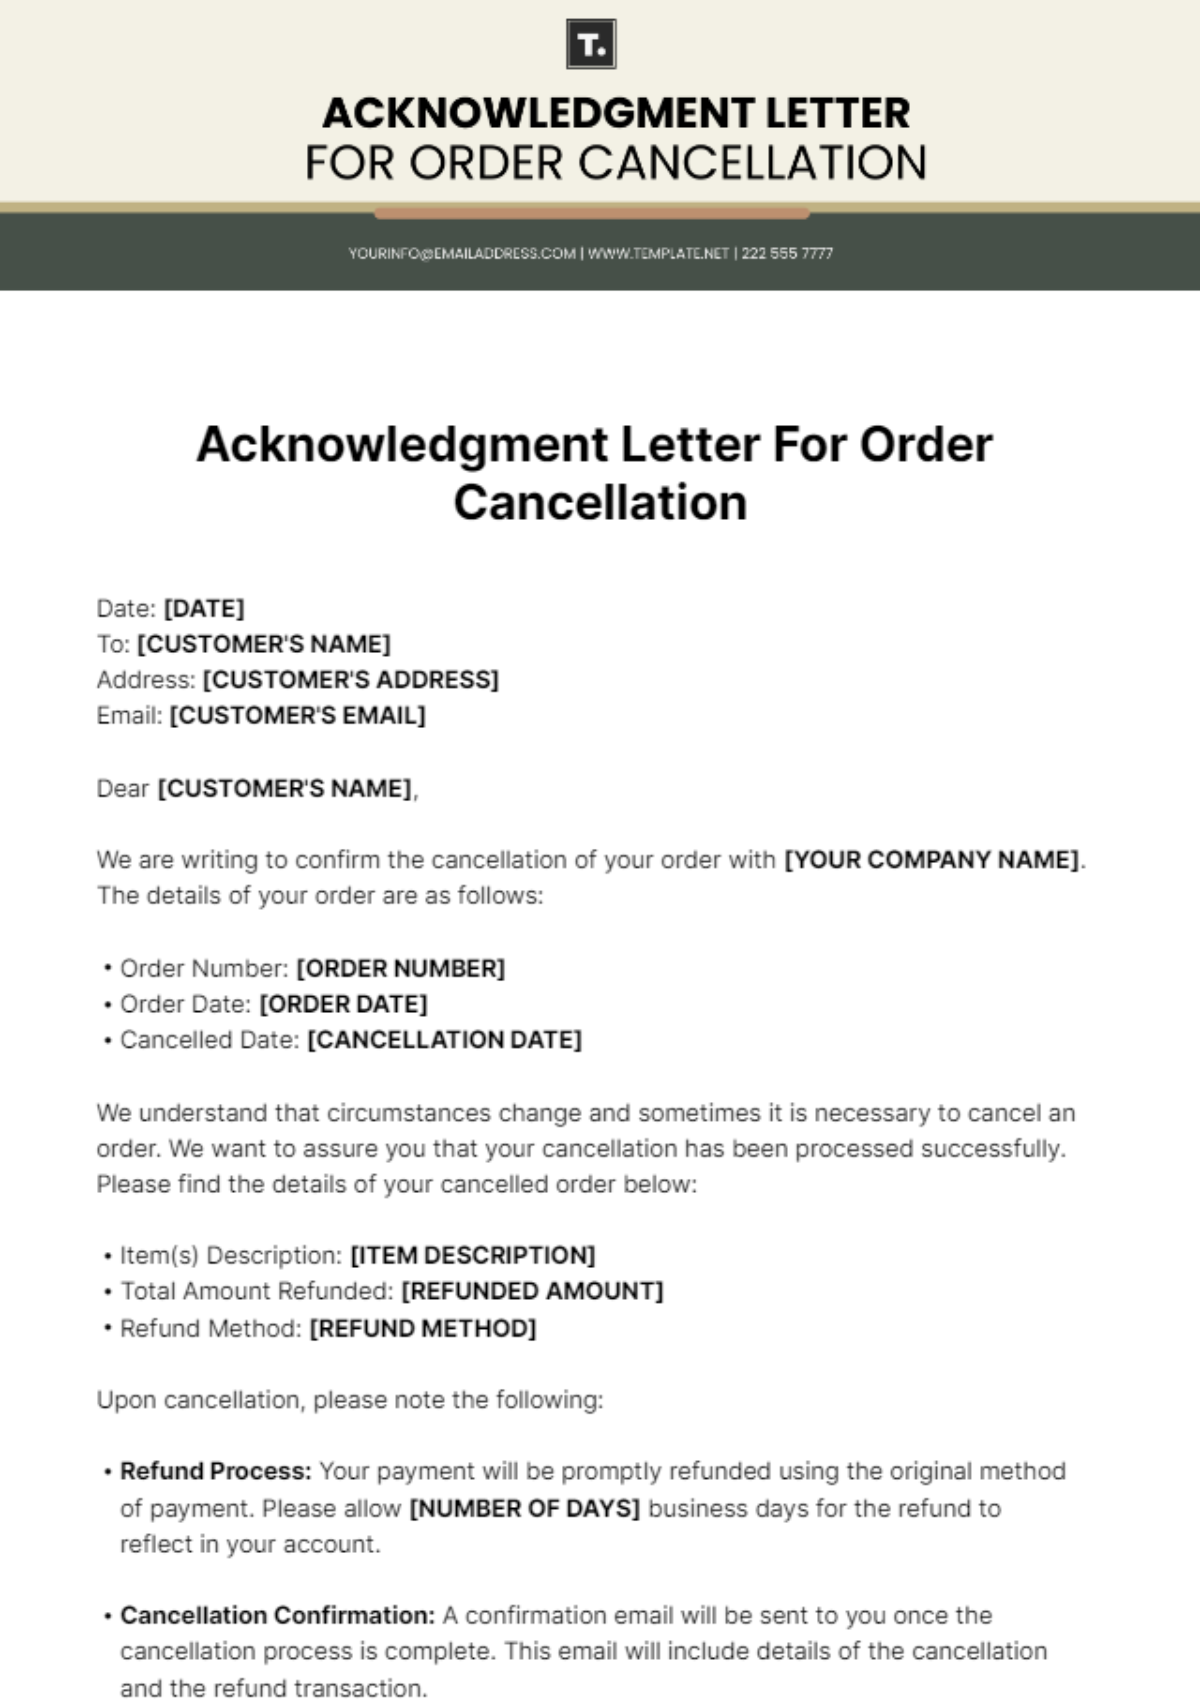 Acknowledgment Letter For Order Cancellation Template